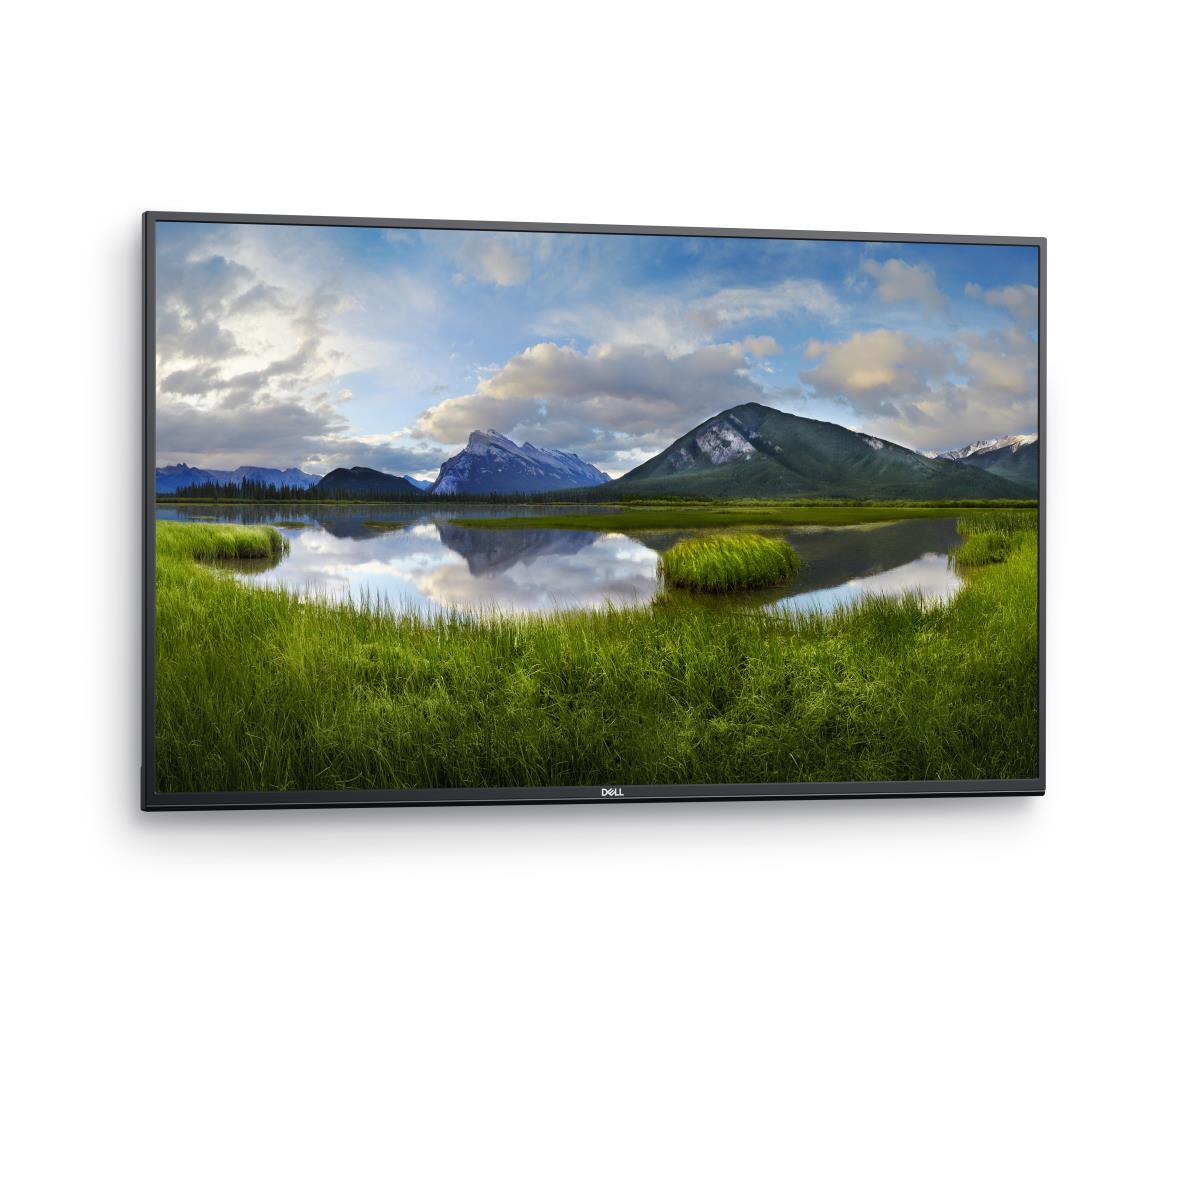 DELL Large Format Monitor - C5519q - 55in - 3840x2160 - Black -  Conferencing Display - Non Touch (210-arct) - 210-ARCT /en